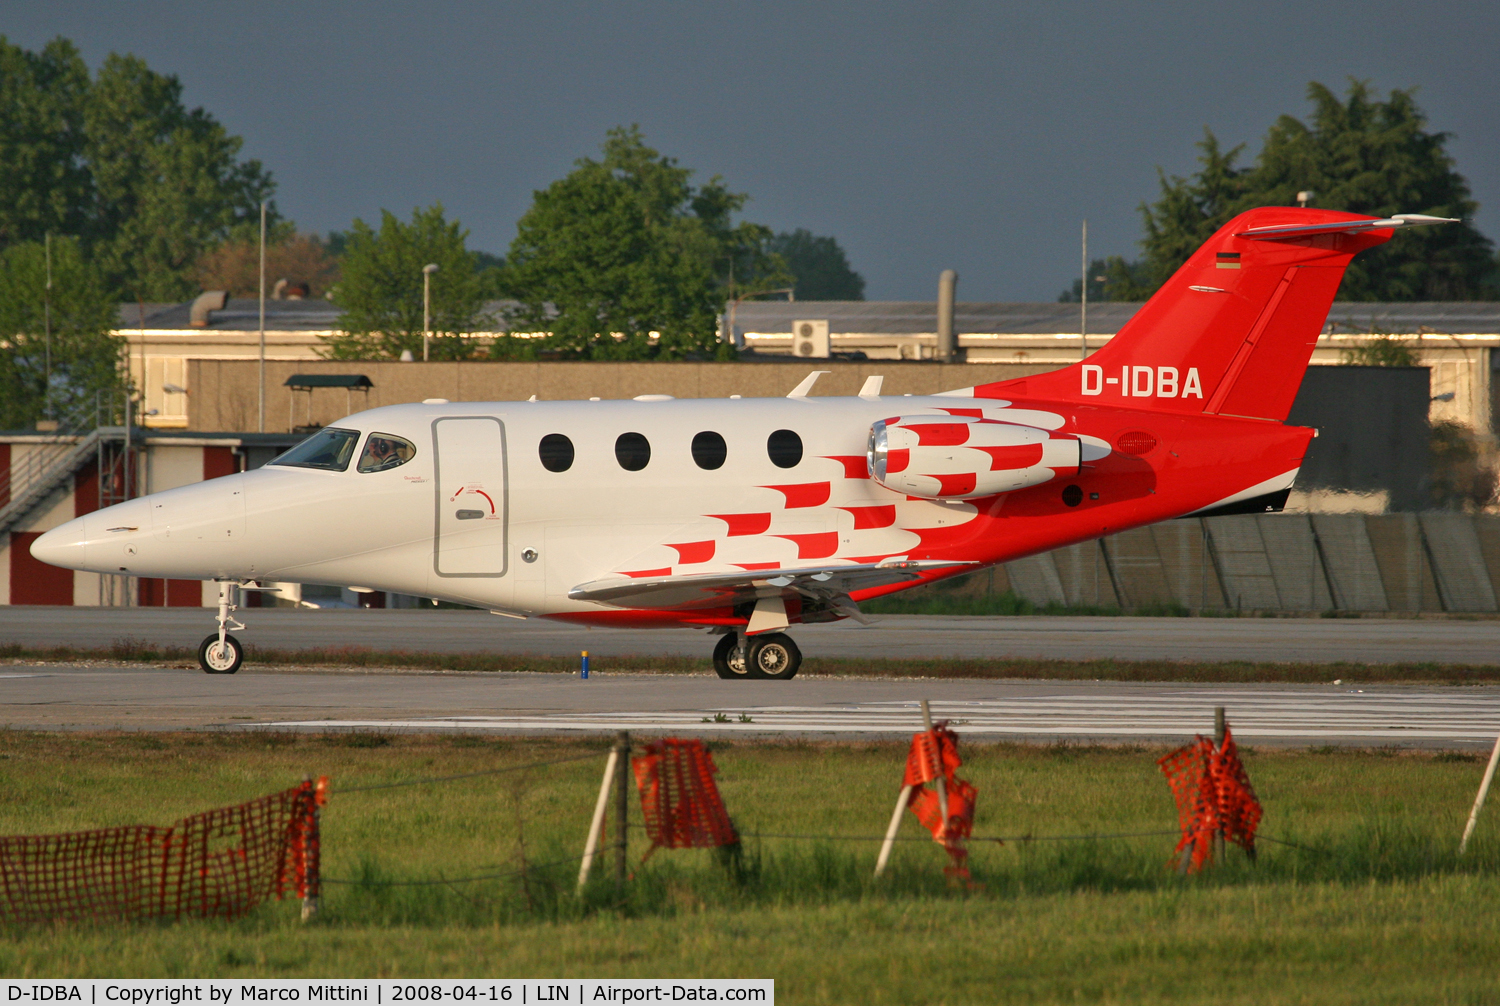 D-IDBA, 2006 Raytheon 390 Premier 1A C/N RB-164, Departing from Milano Linate